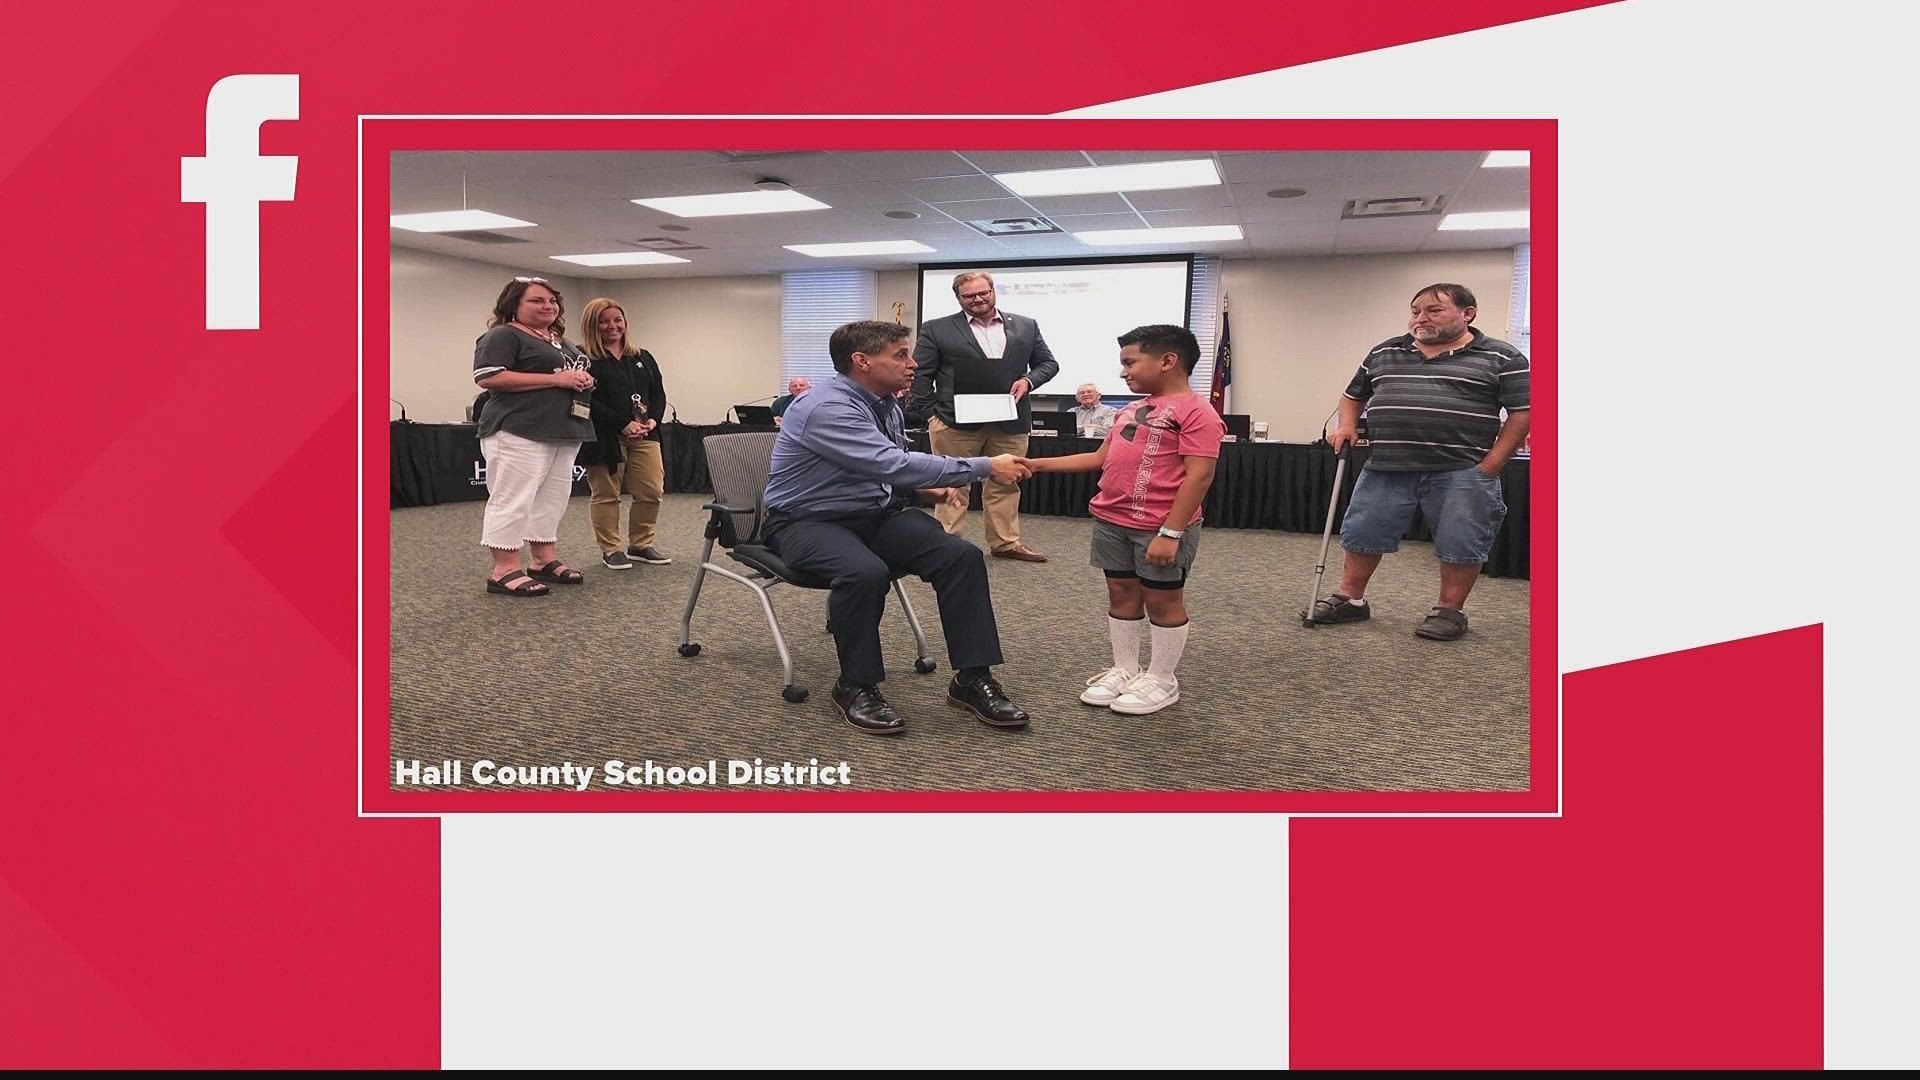 Julian Pedraza, a 4th grader at Martin Elementary was honored for his actions.